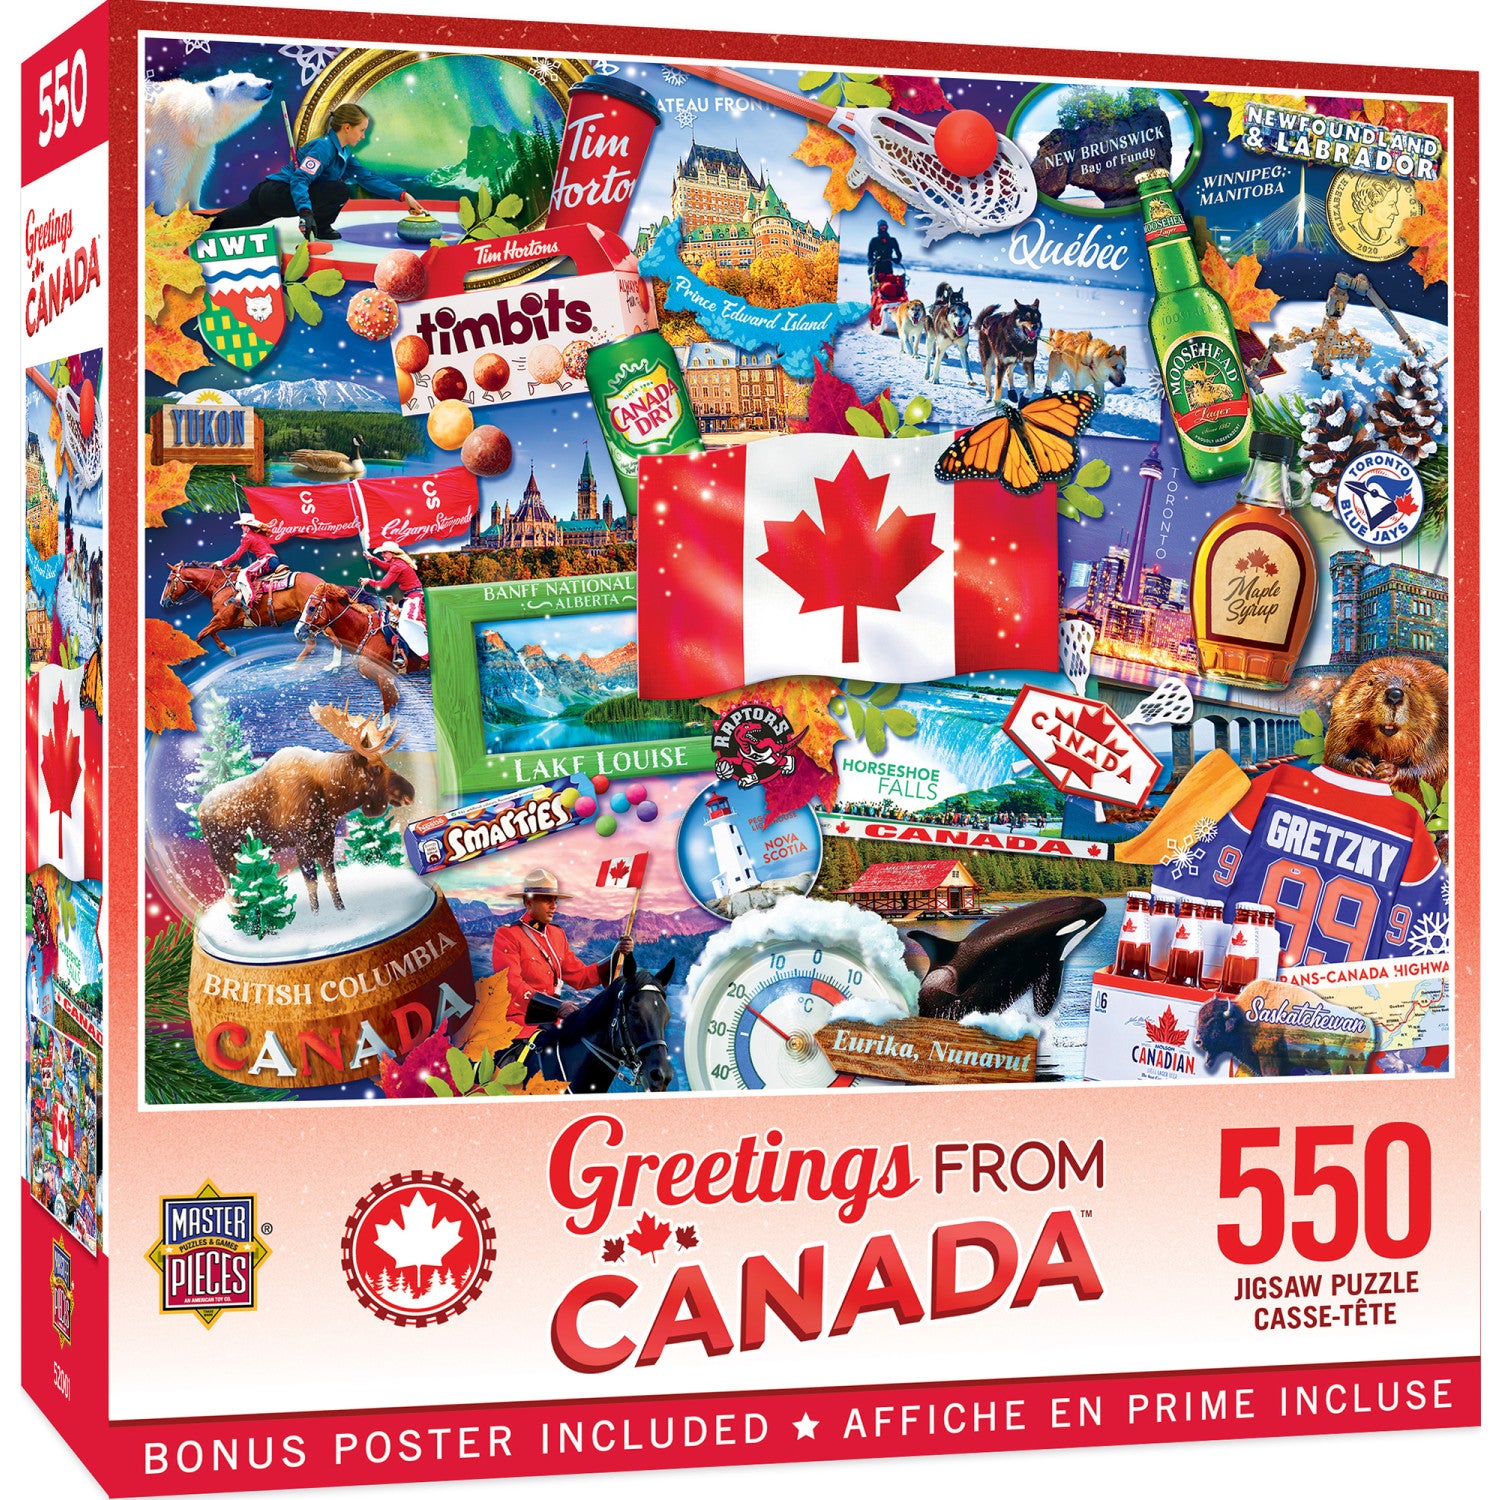 Greetings From Canada - 550 Piece Puzzle